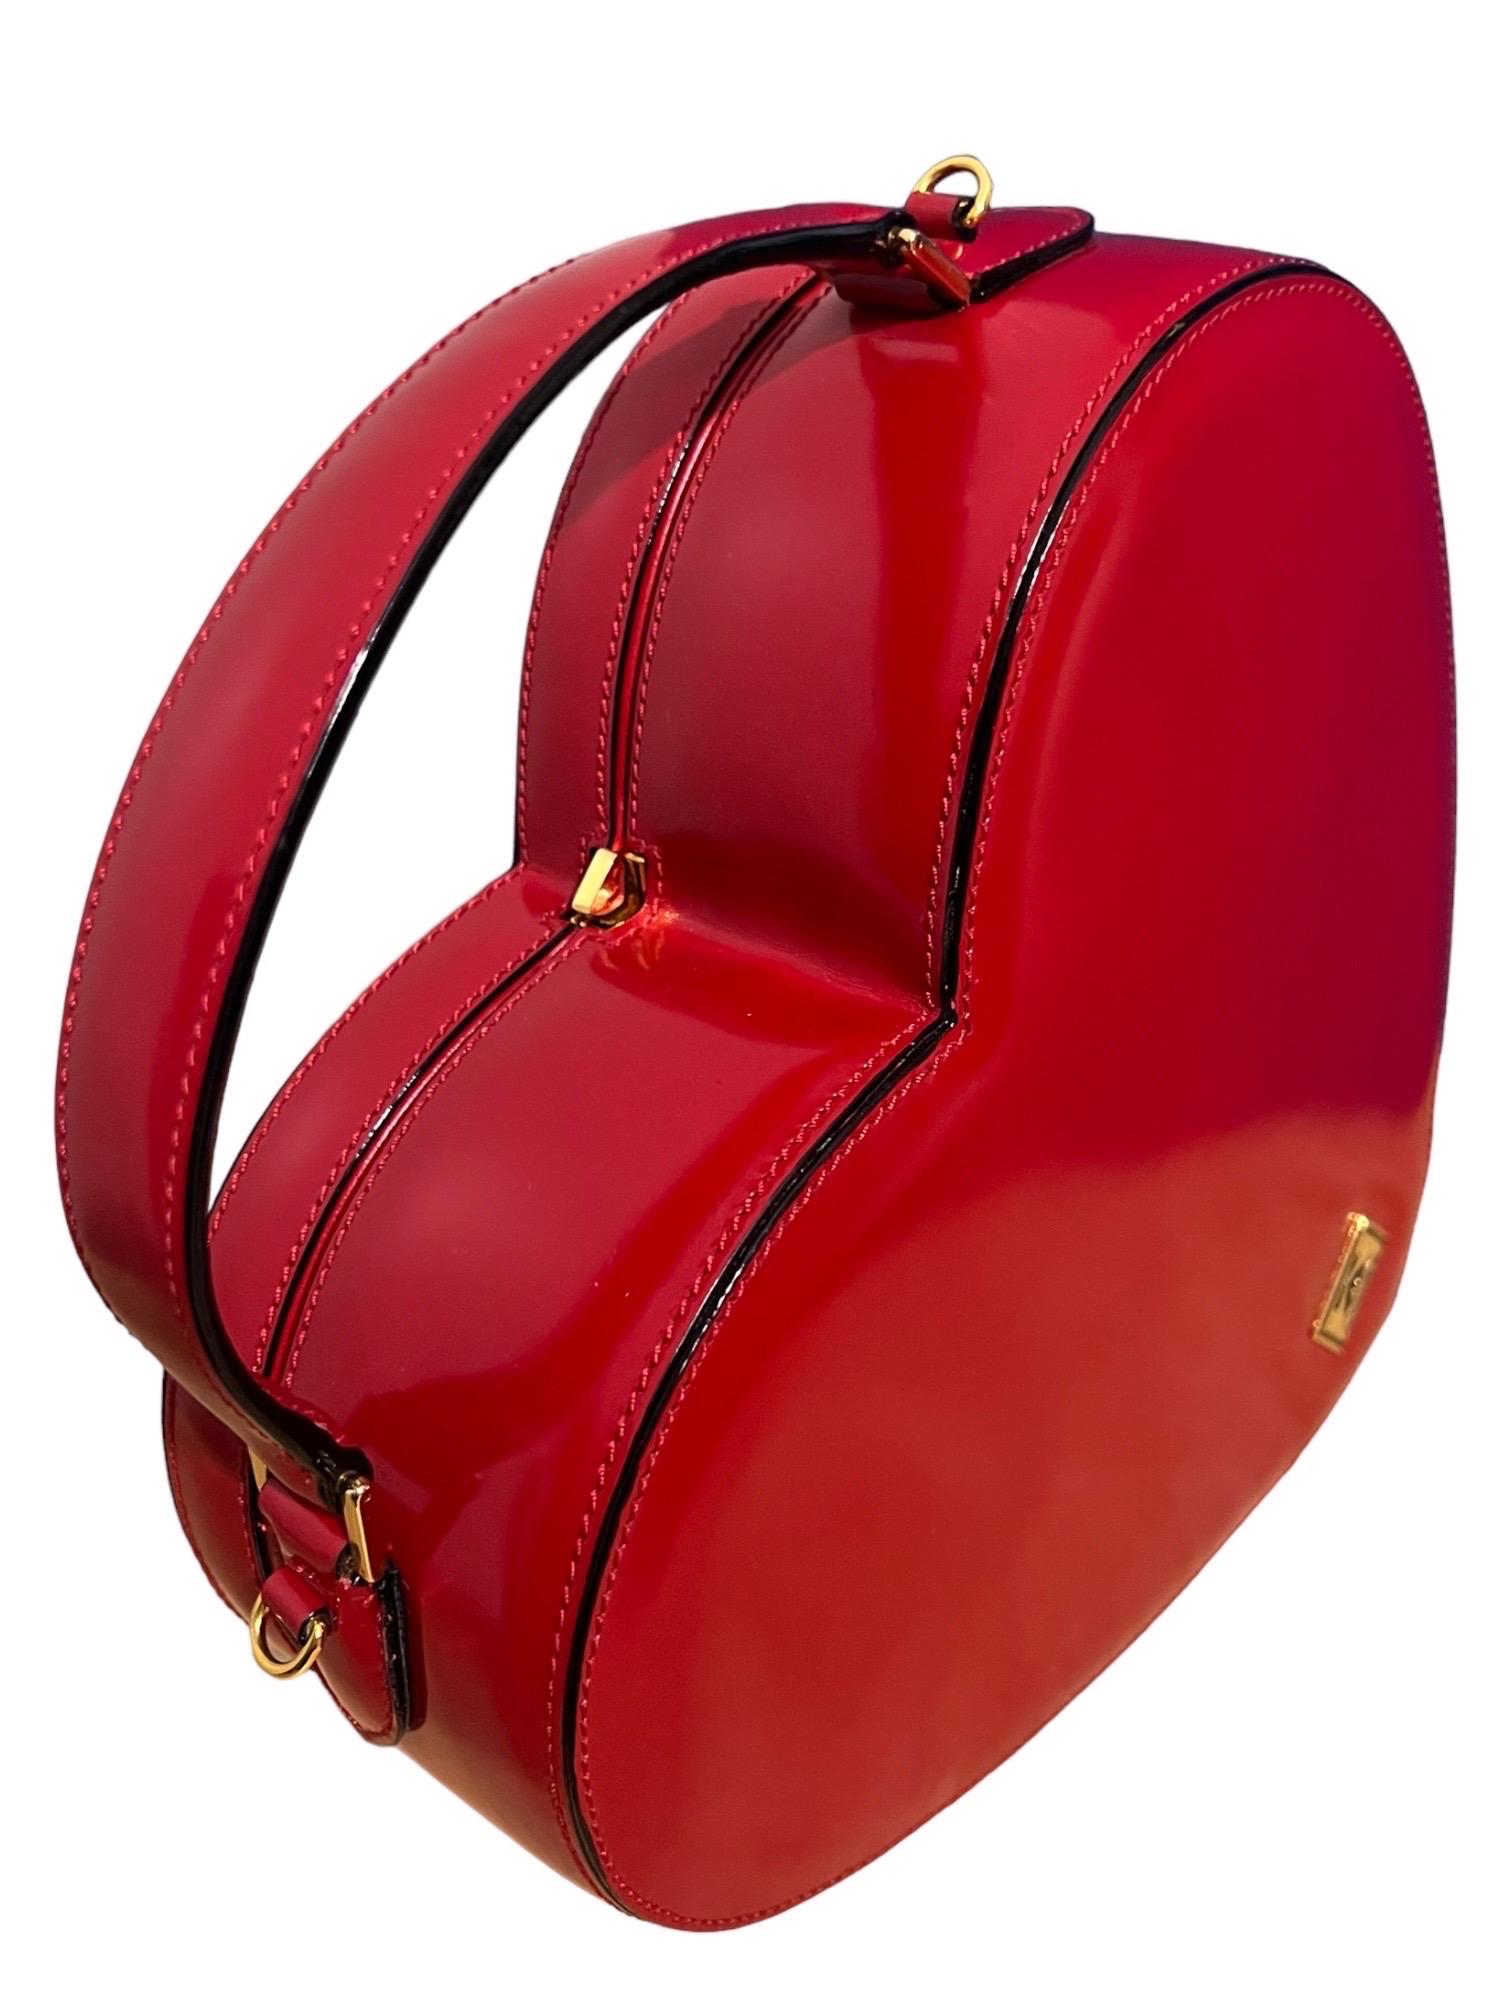 Moschino Vintage Red Leather Heart Bag The Nanny 1